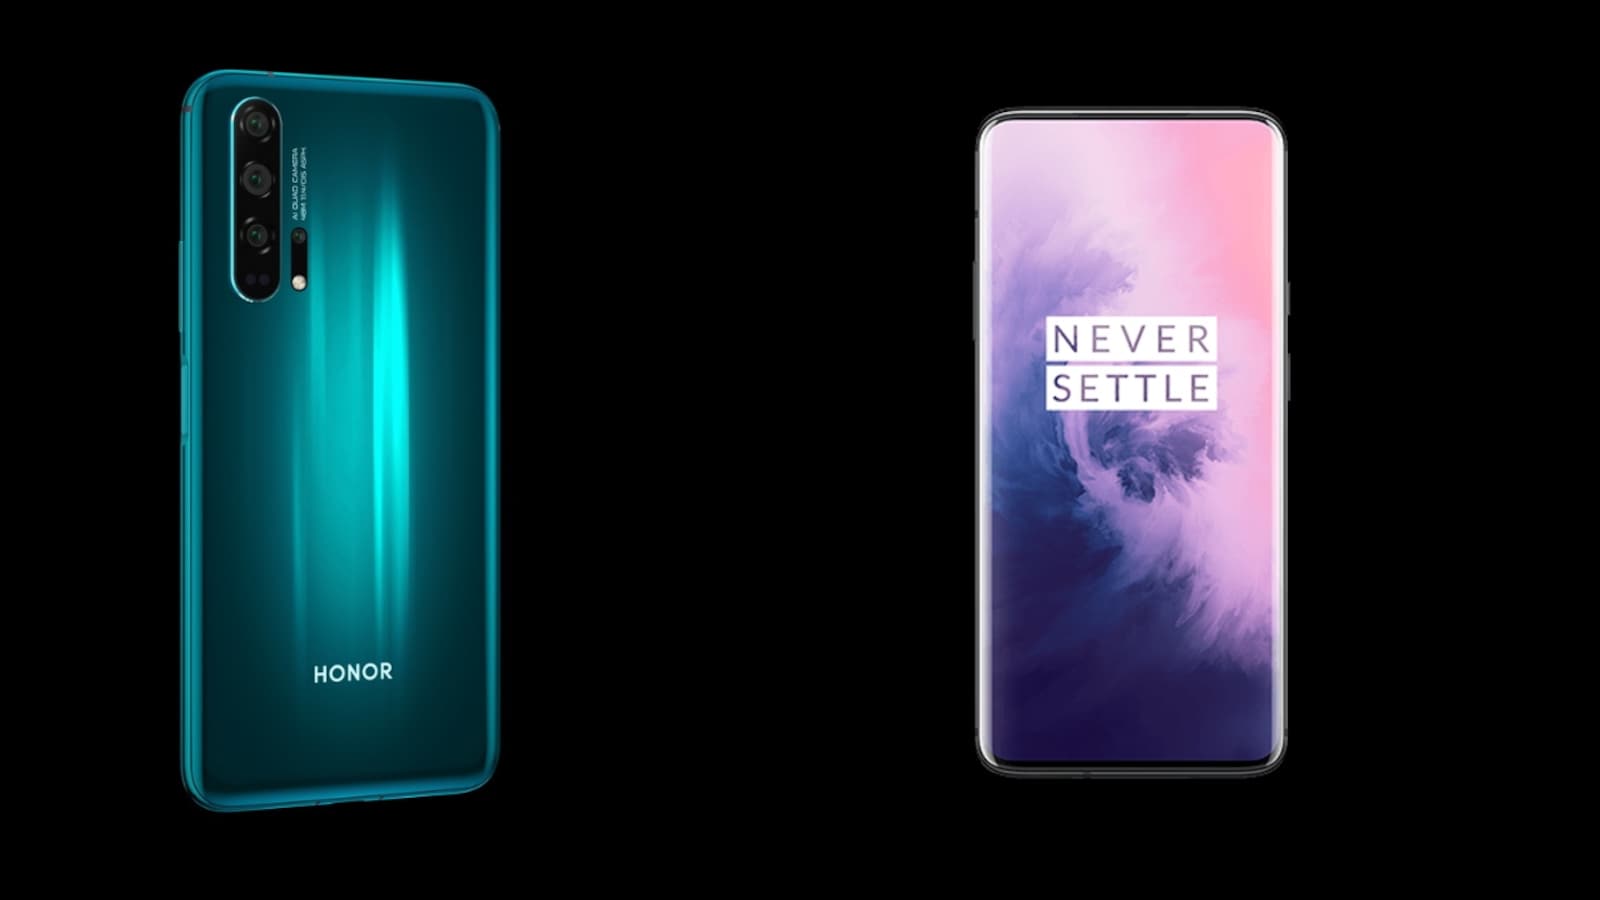 Does the Honor 20 Pro have what it takes to dethrone the OnePlus 7 Pro?  Find out in our comparison